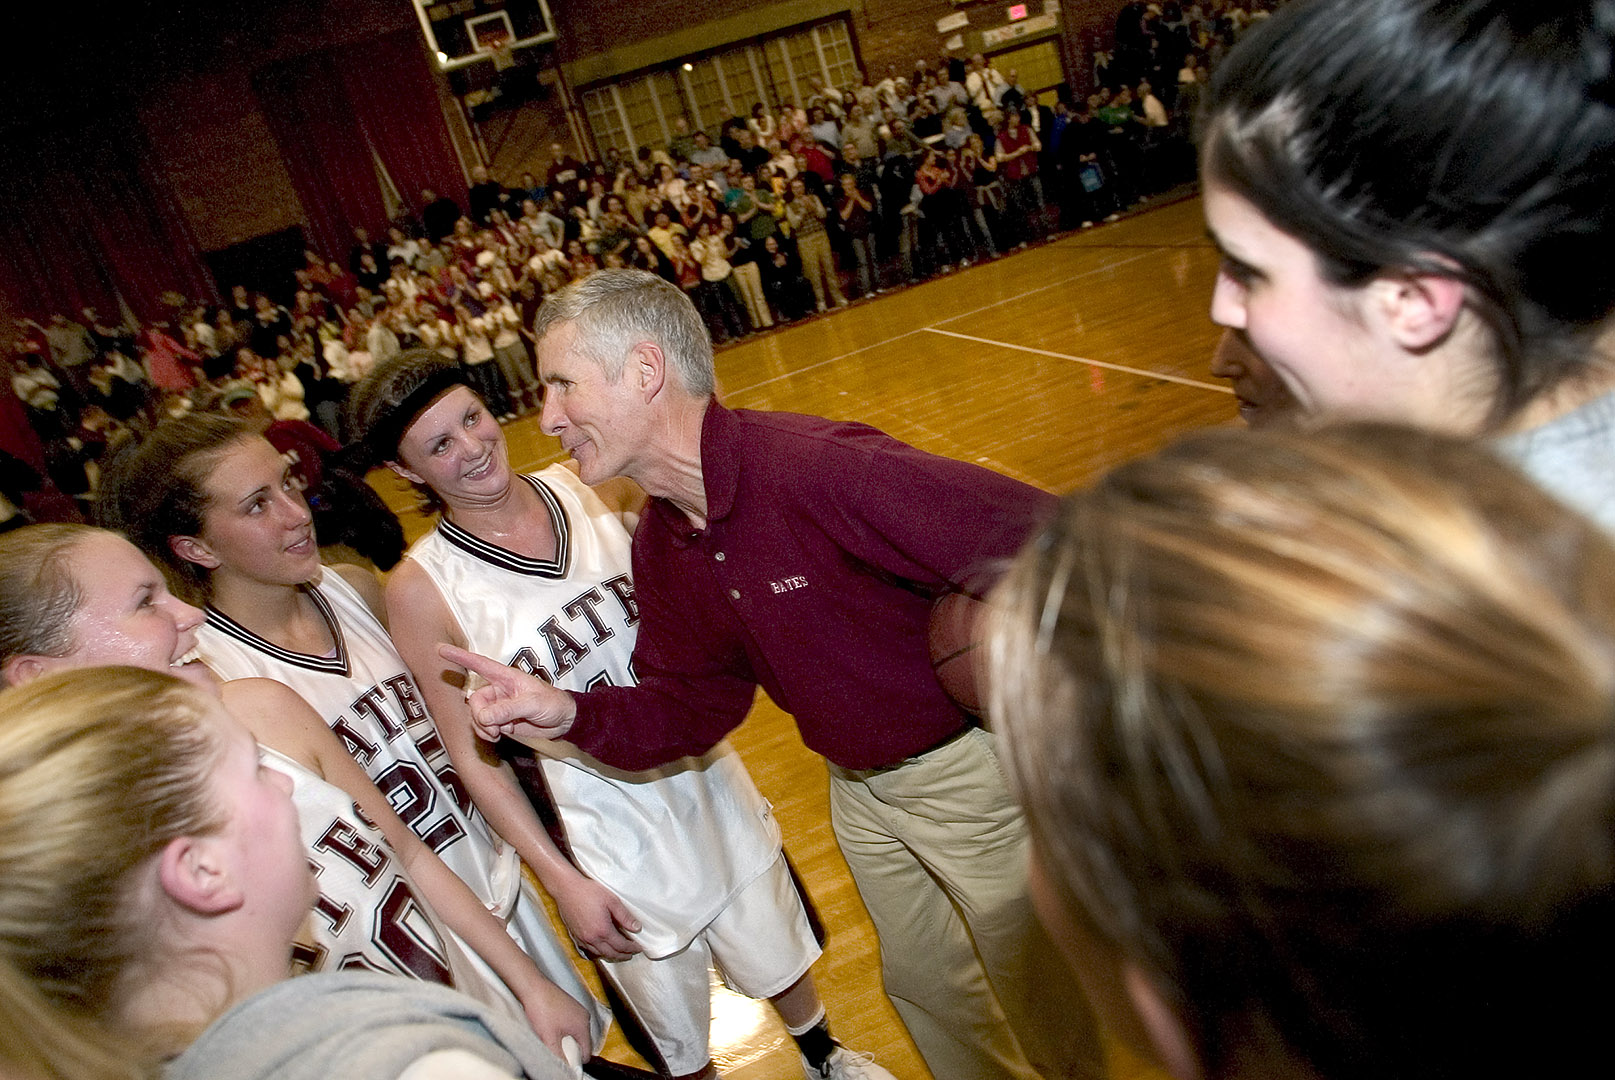 Jim Murphy congratulates his team after a win vs. Bowdoin on Feb. 1, 2005. The victory was Murphy's 200th career 
victory, en route to 343 career victories. (Phyllis Graber Jensen/Bates College)